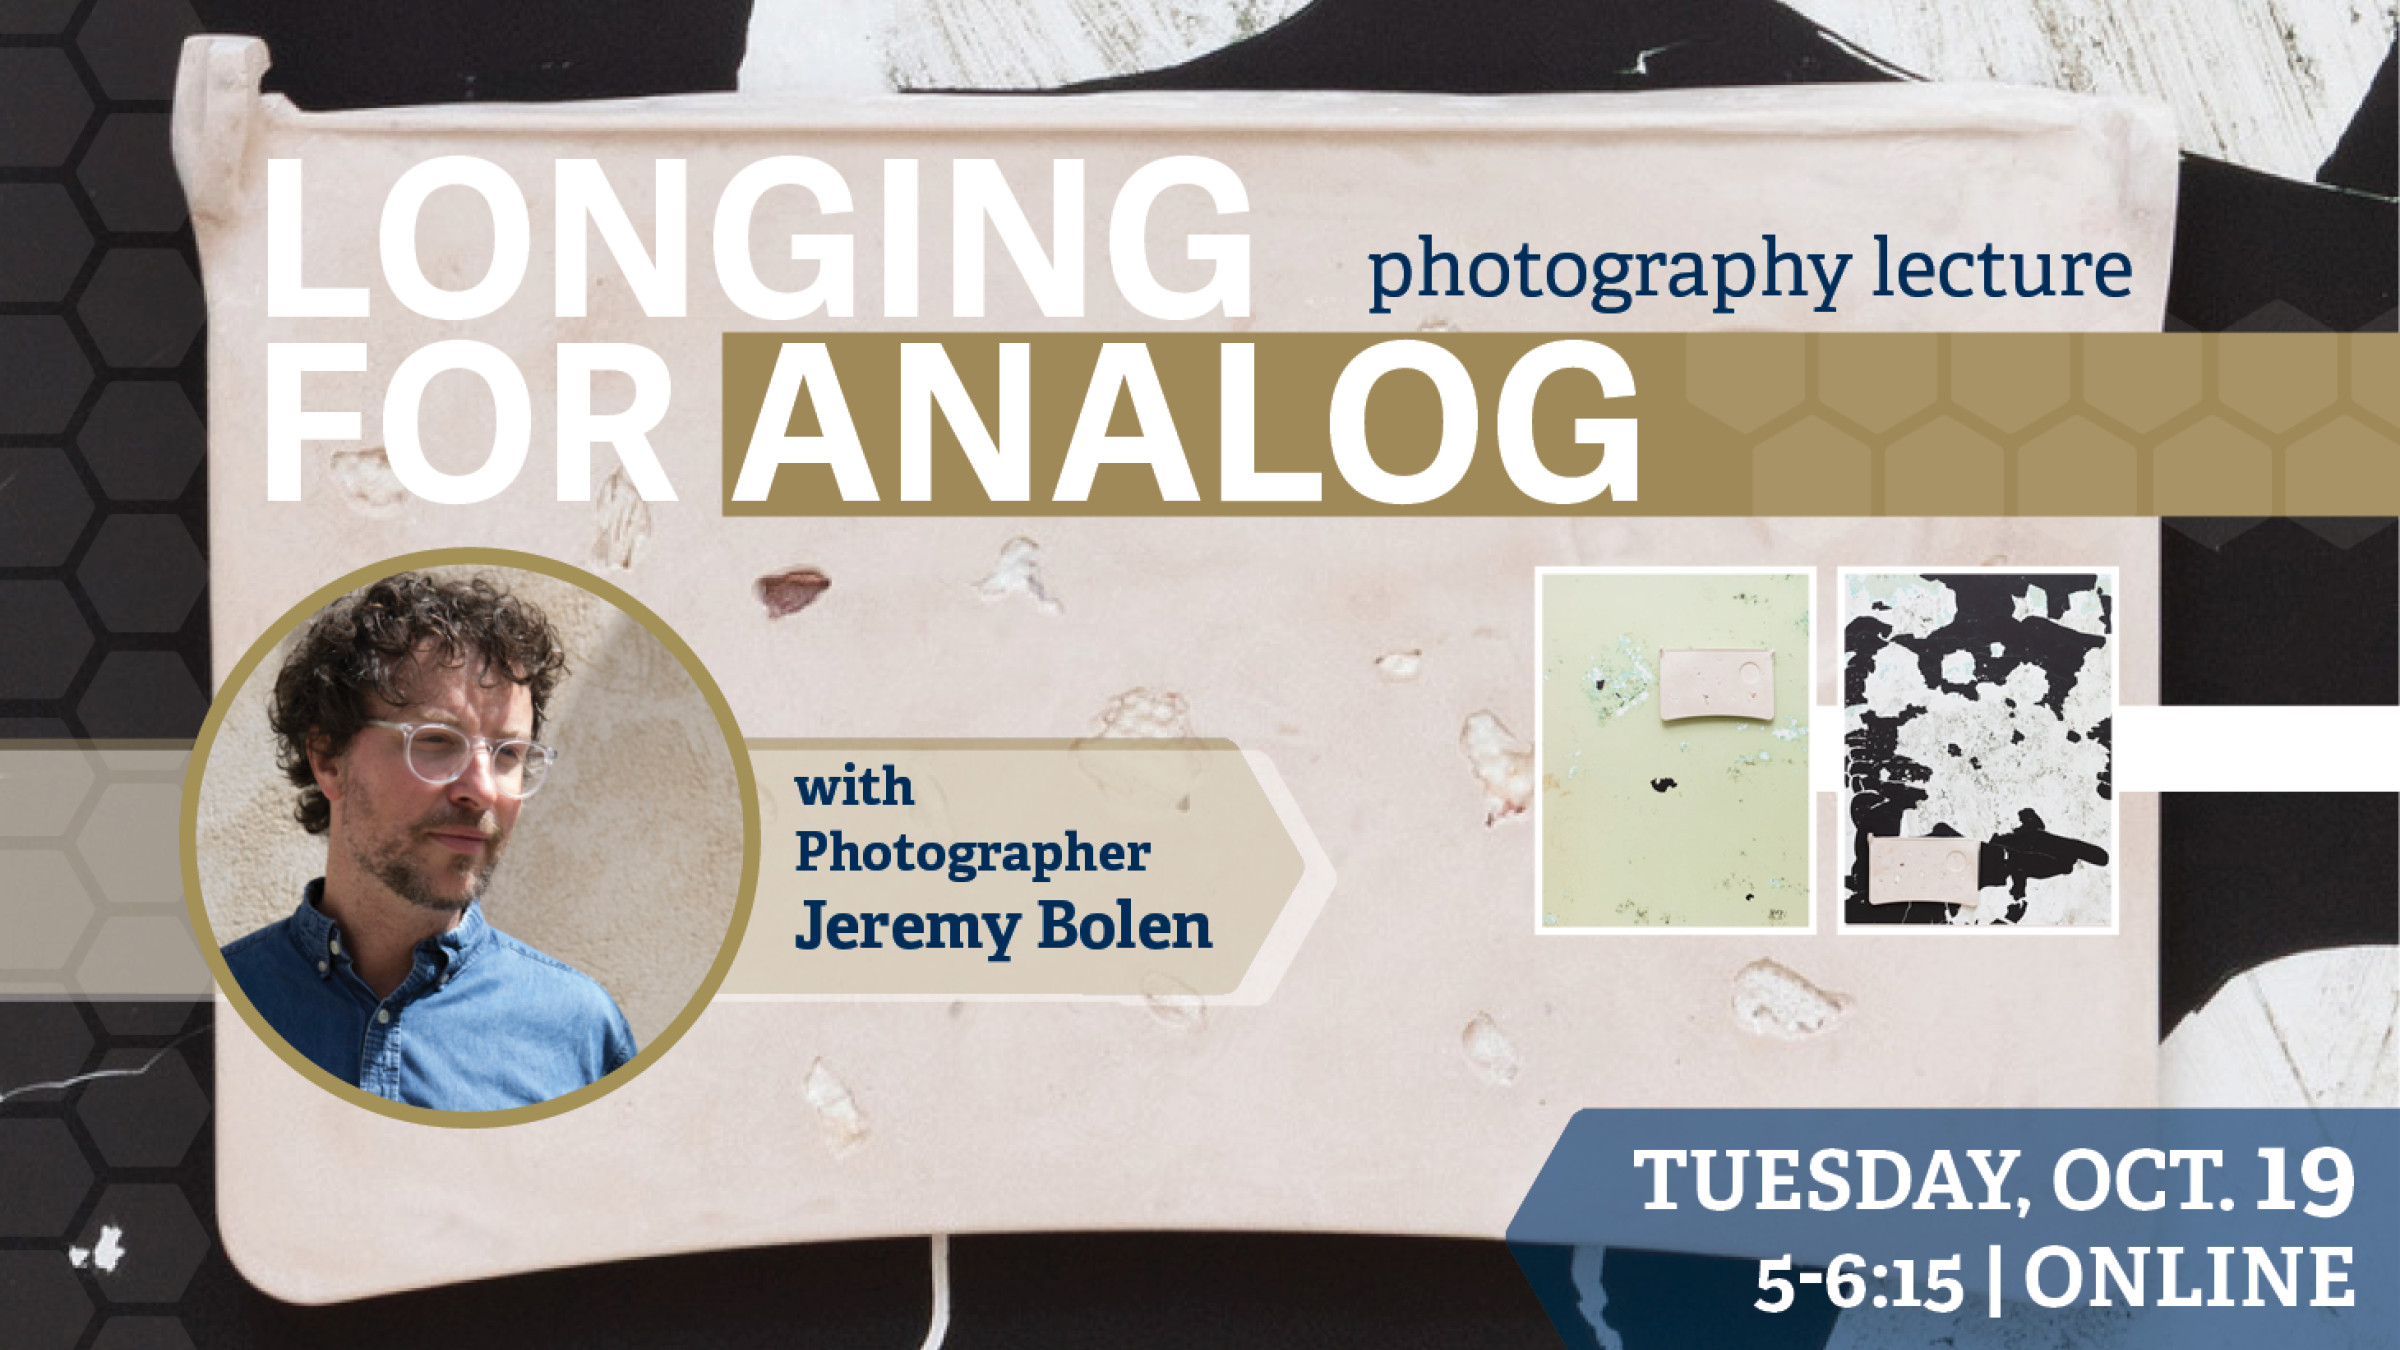 Longing For Analog Lecture with Photographer Jeremy Bolen (ONLINE)